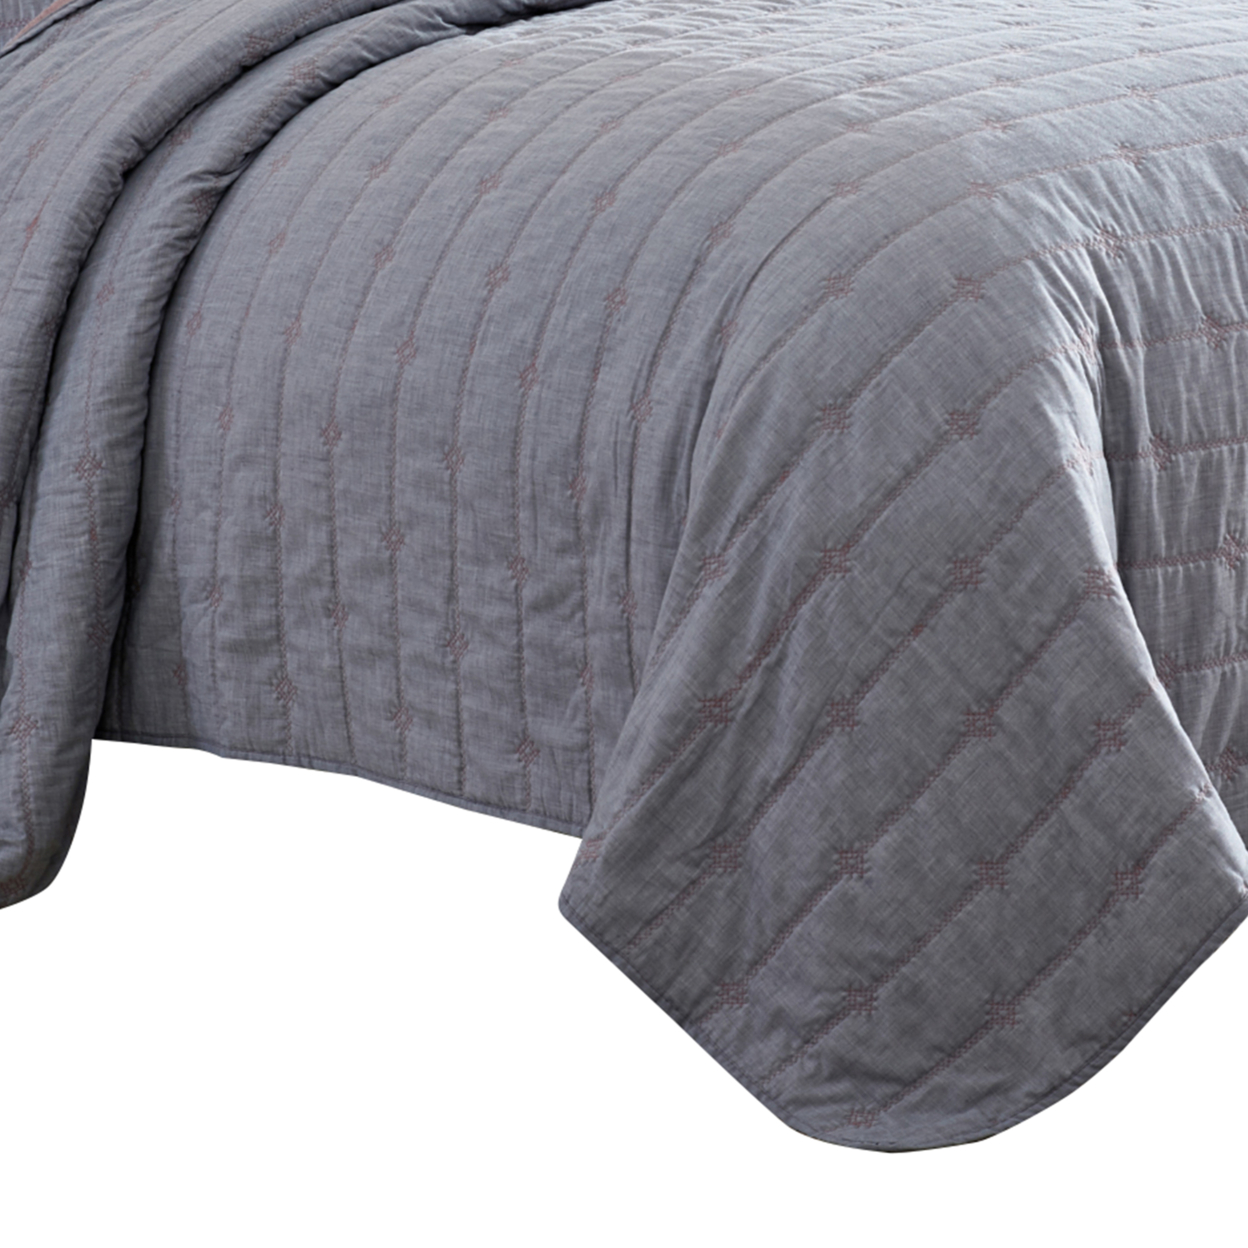 Veria 3 Piece King Quilt Set With Channel Stitching The Urban Port, Gray And Pink- Saltoro Sherpi